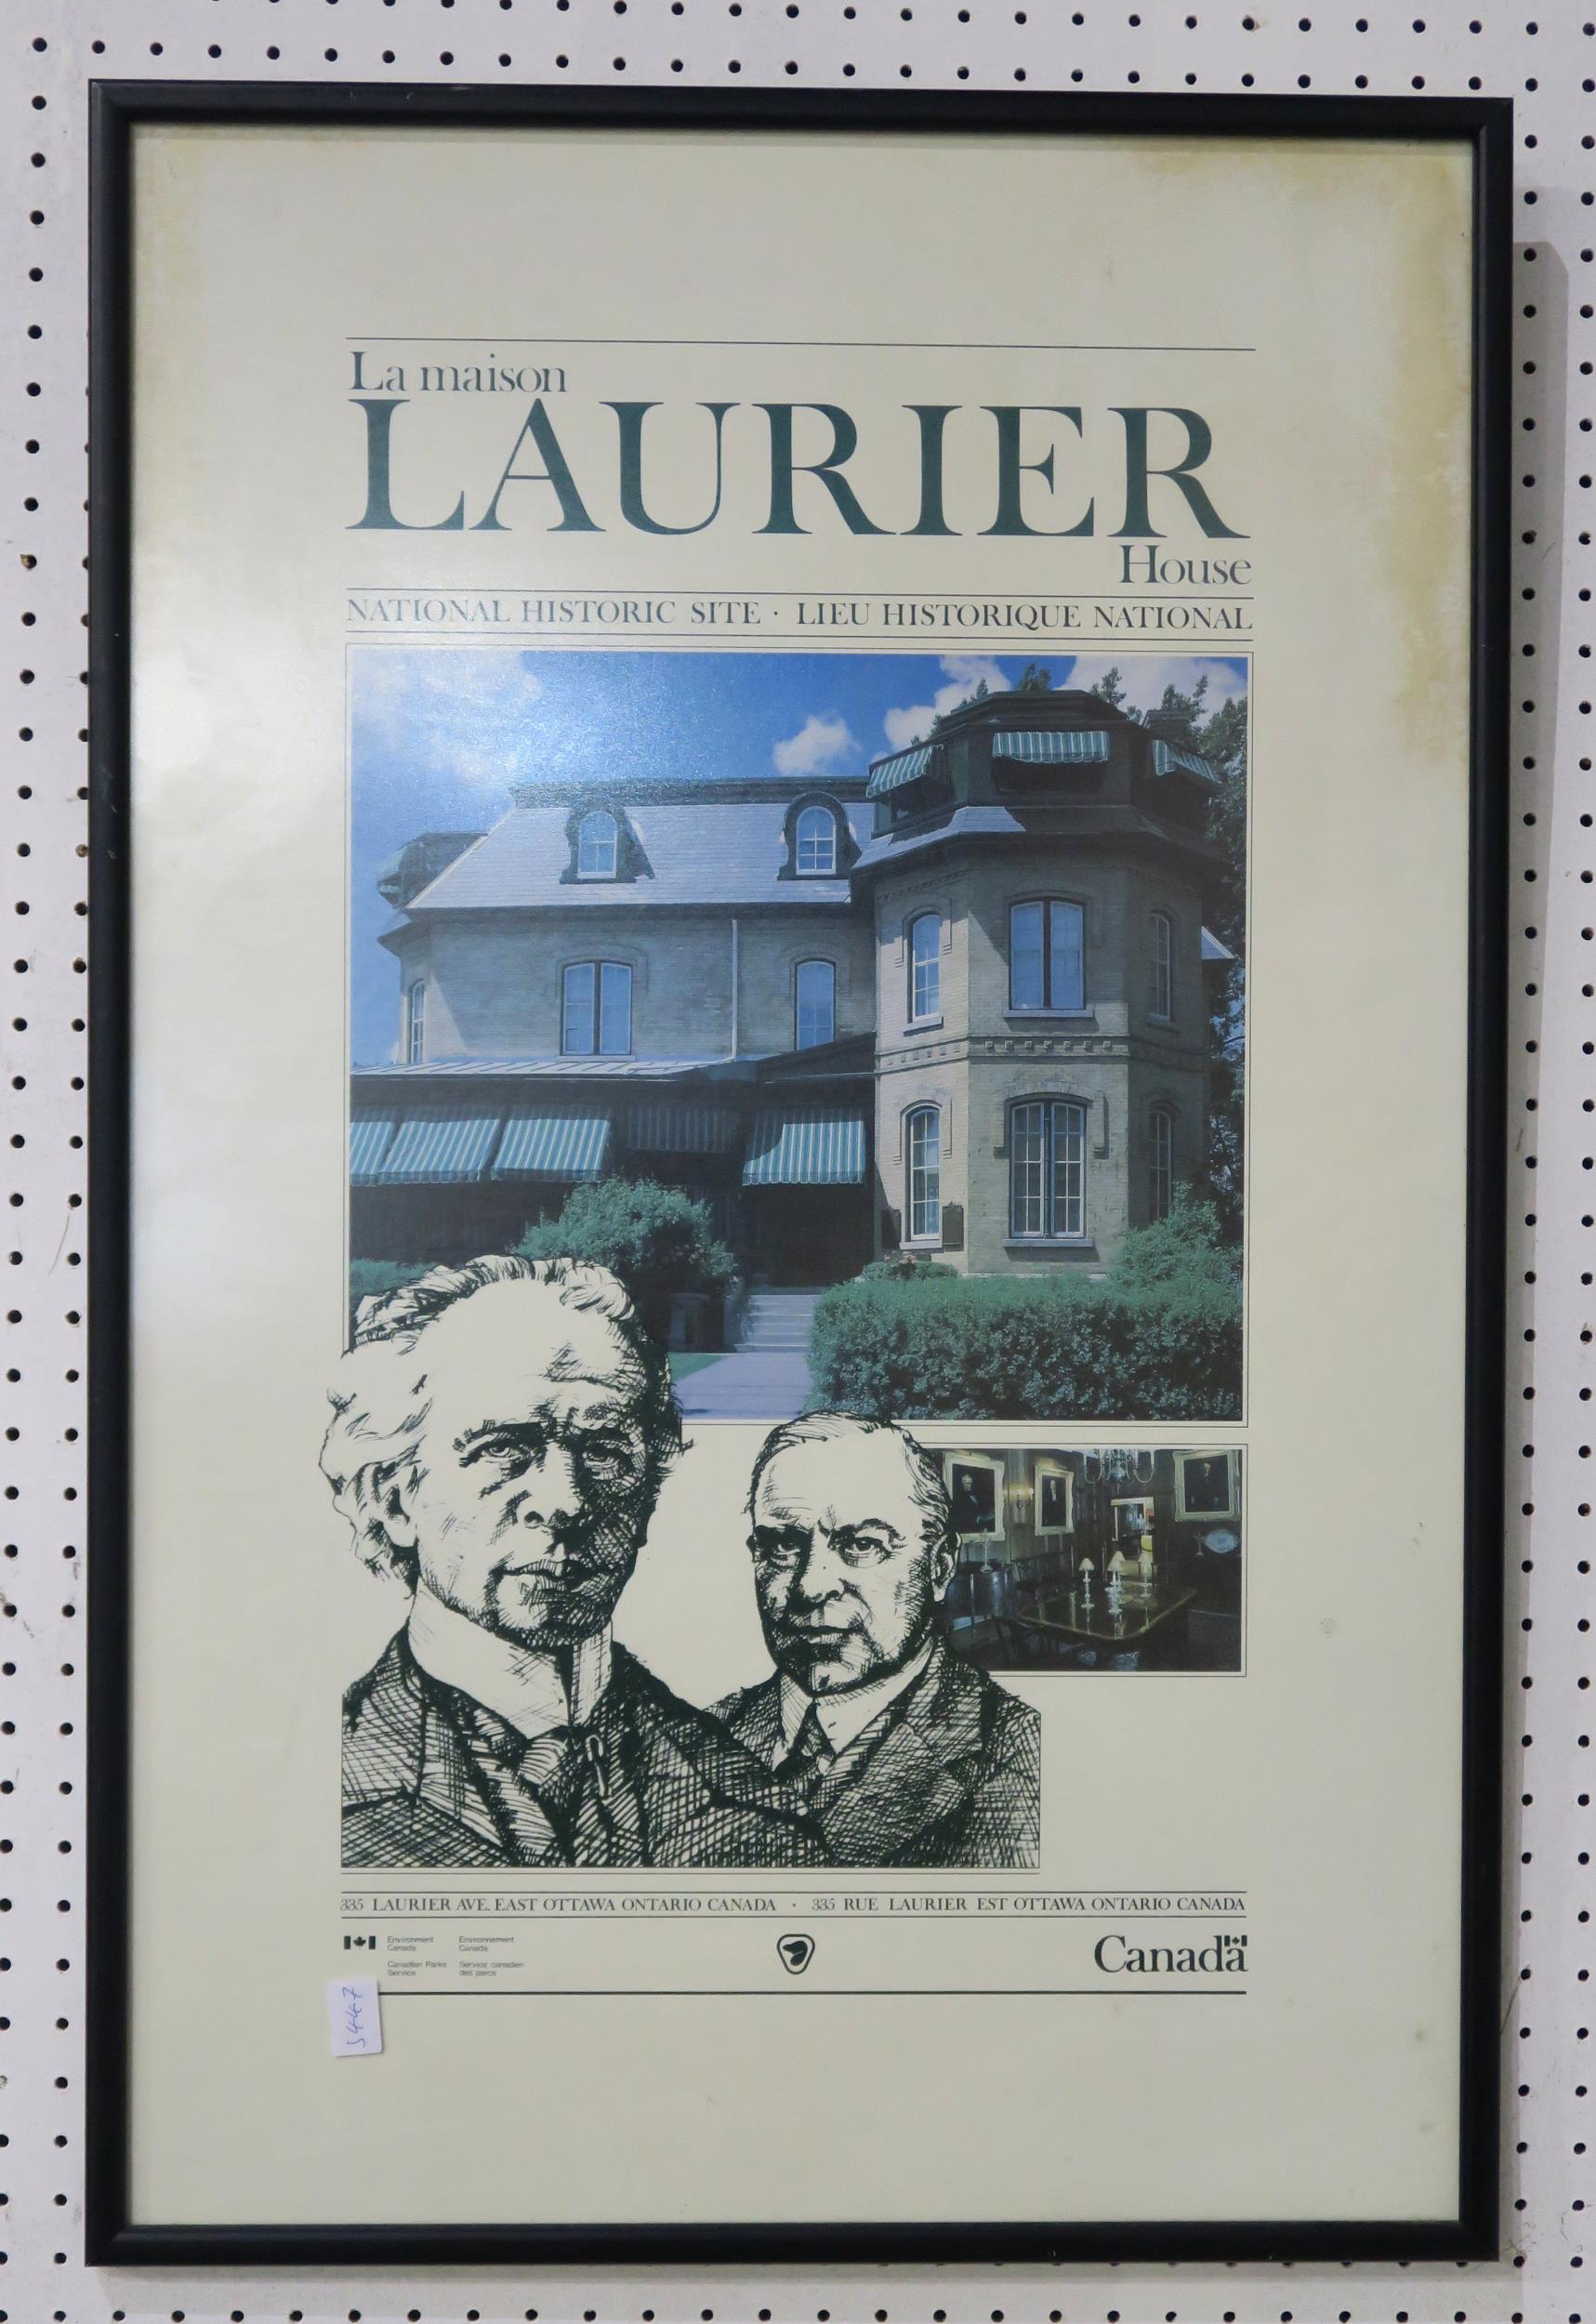 A framed exhibition poster for La Maison Laurier, National Historic Site, Ottawa, Canada Condition